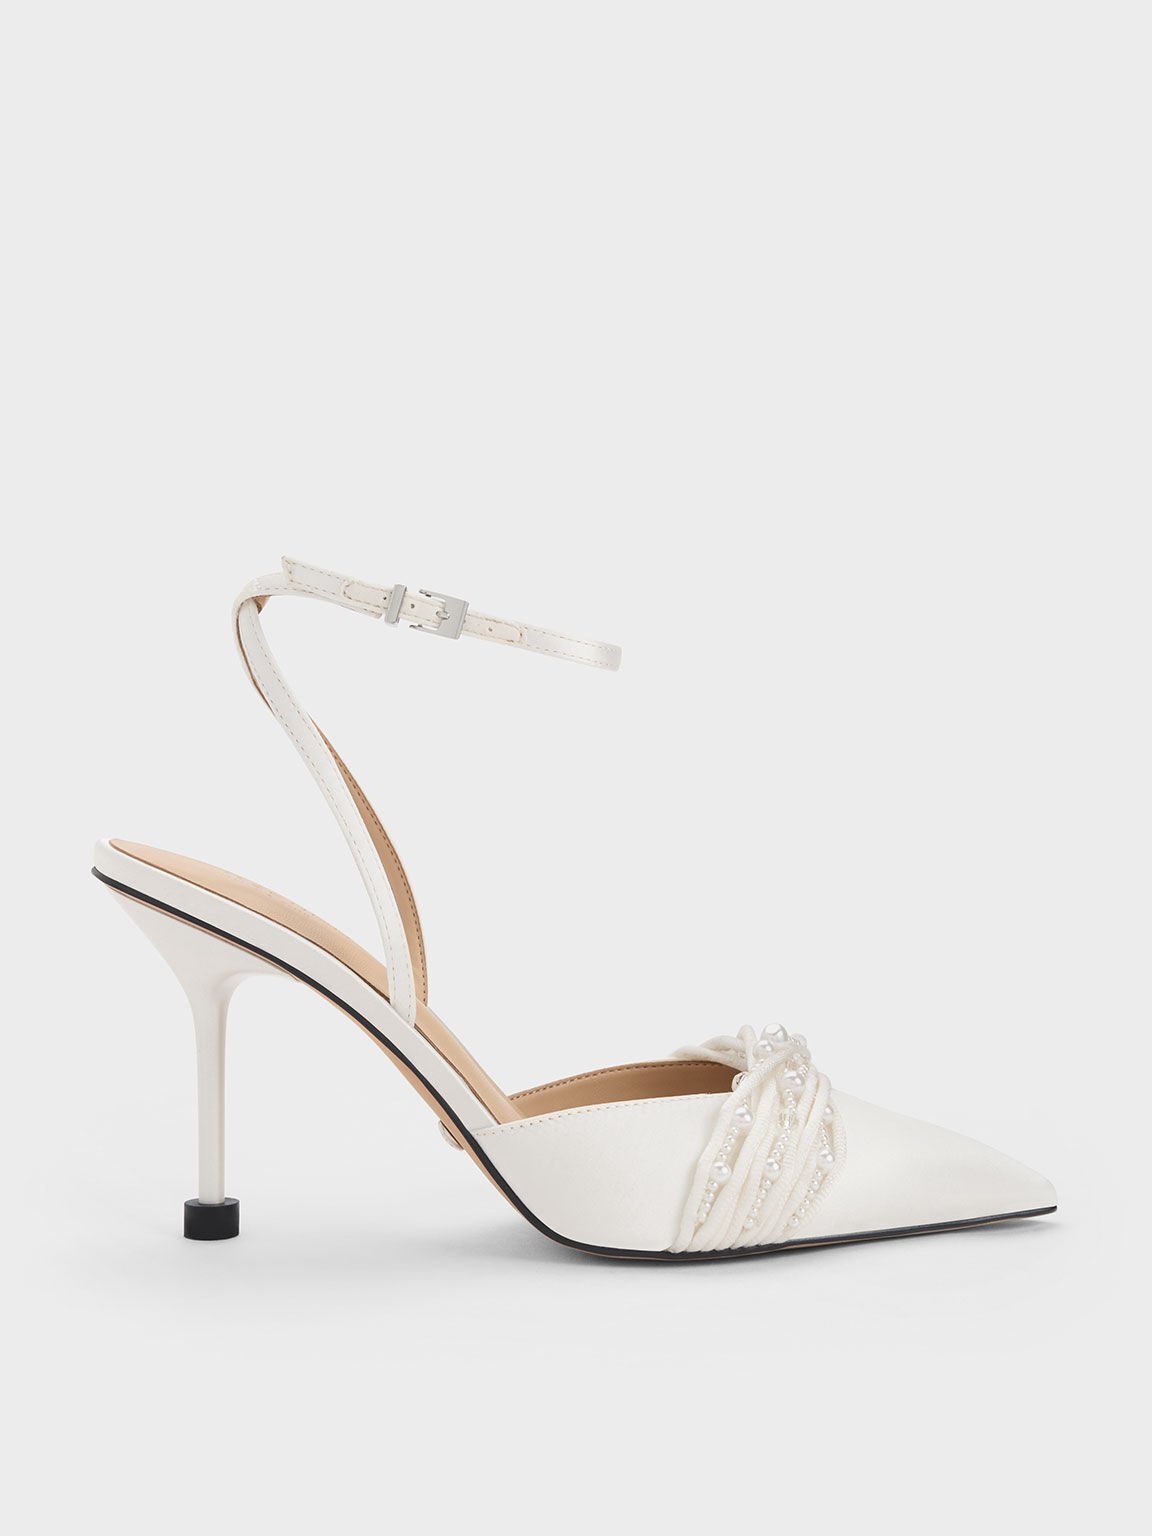 ASOS DESIGN Noelle pointed insole strappy heeled sandals in off white | ASOS